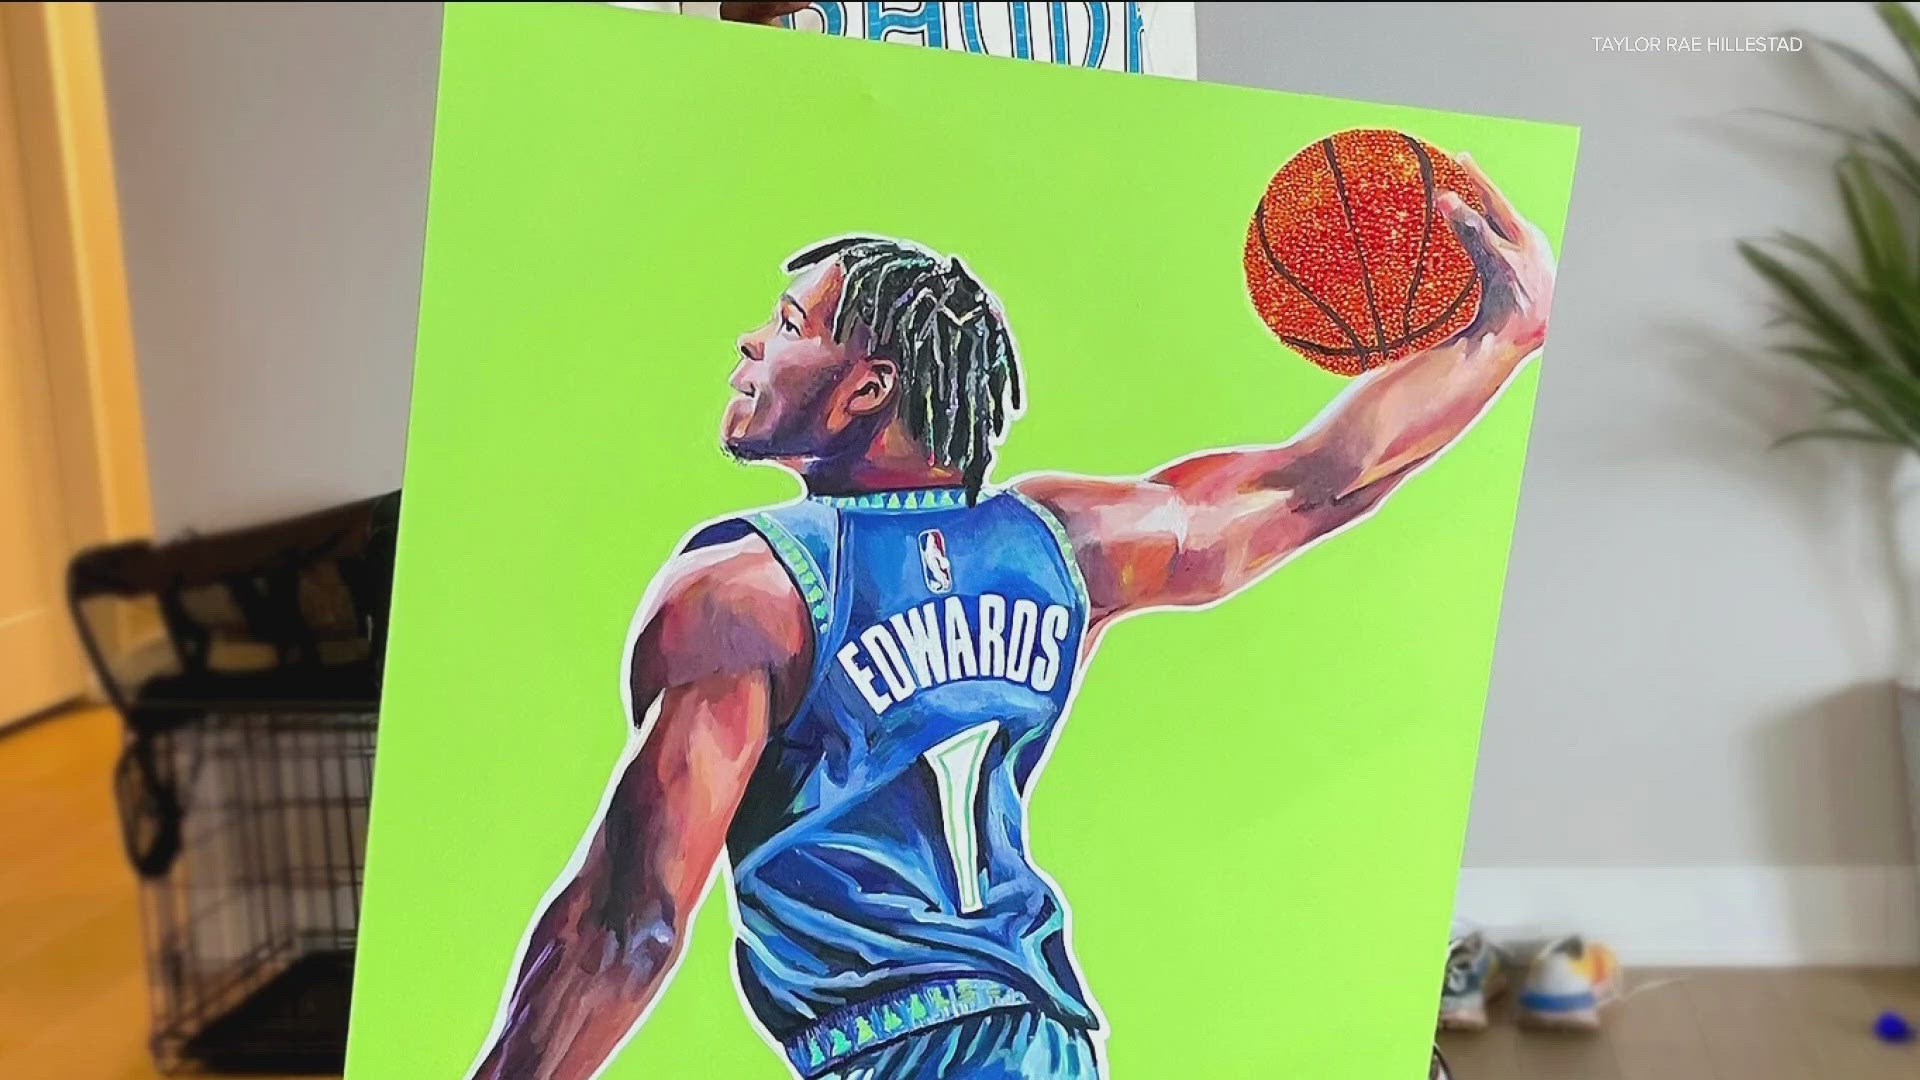 The artist paints sprawling depictions of the Minnesota favs in action and uses neon colors and rhinestones to bring them to life.